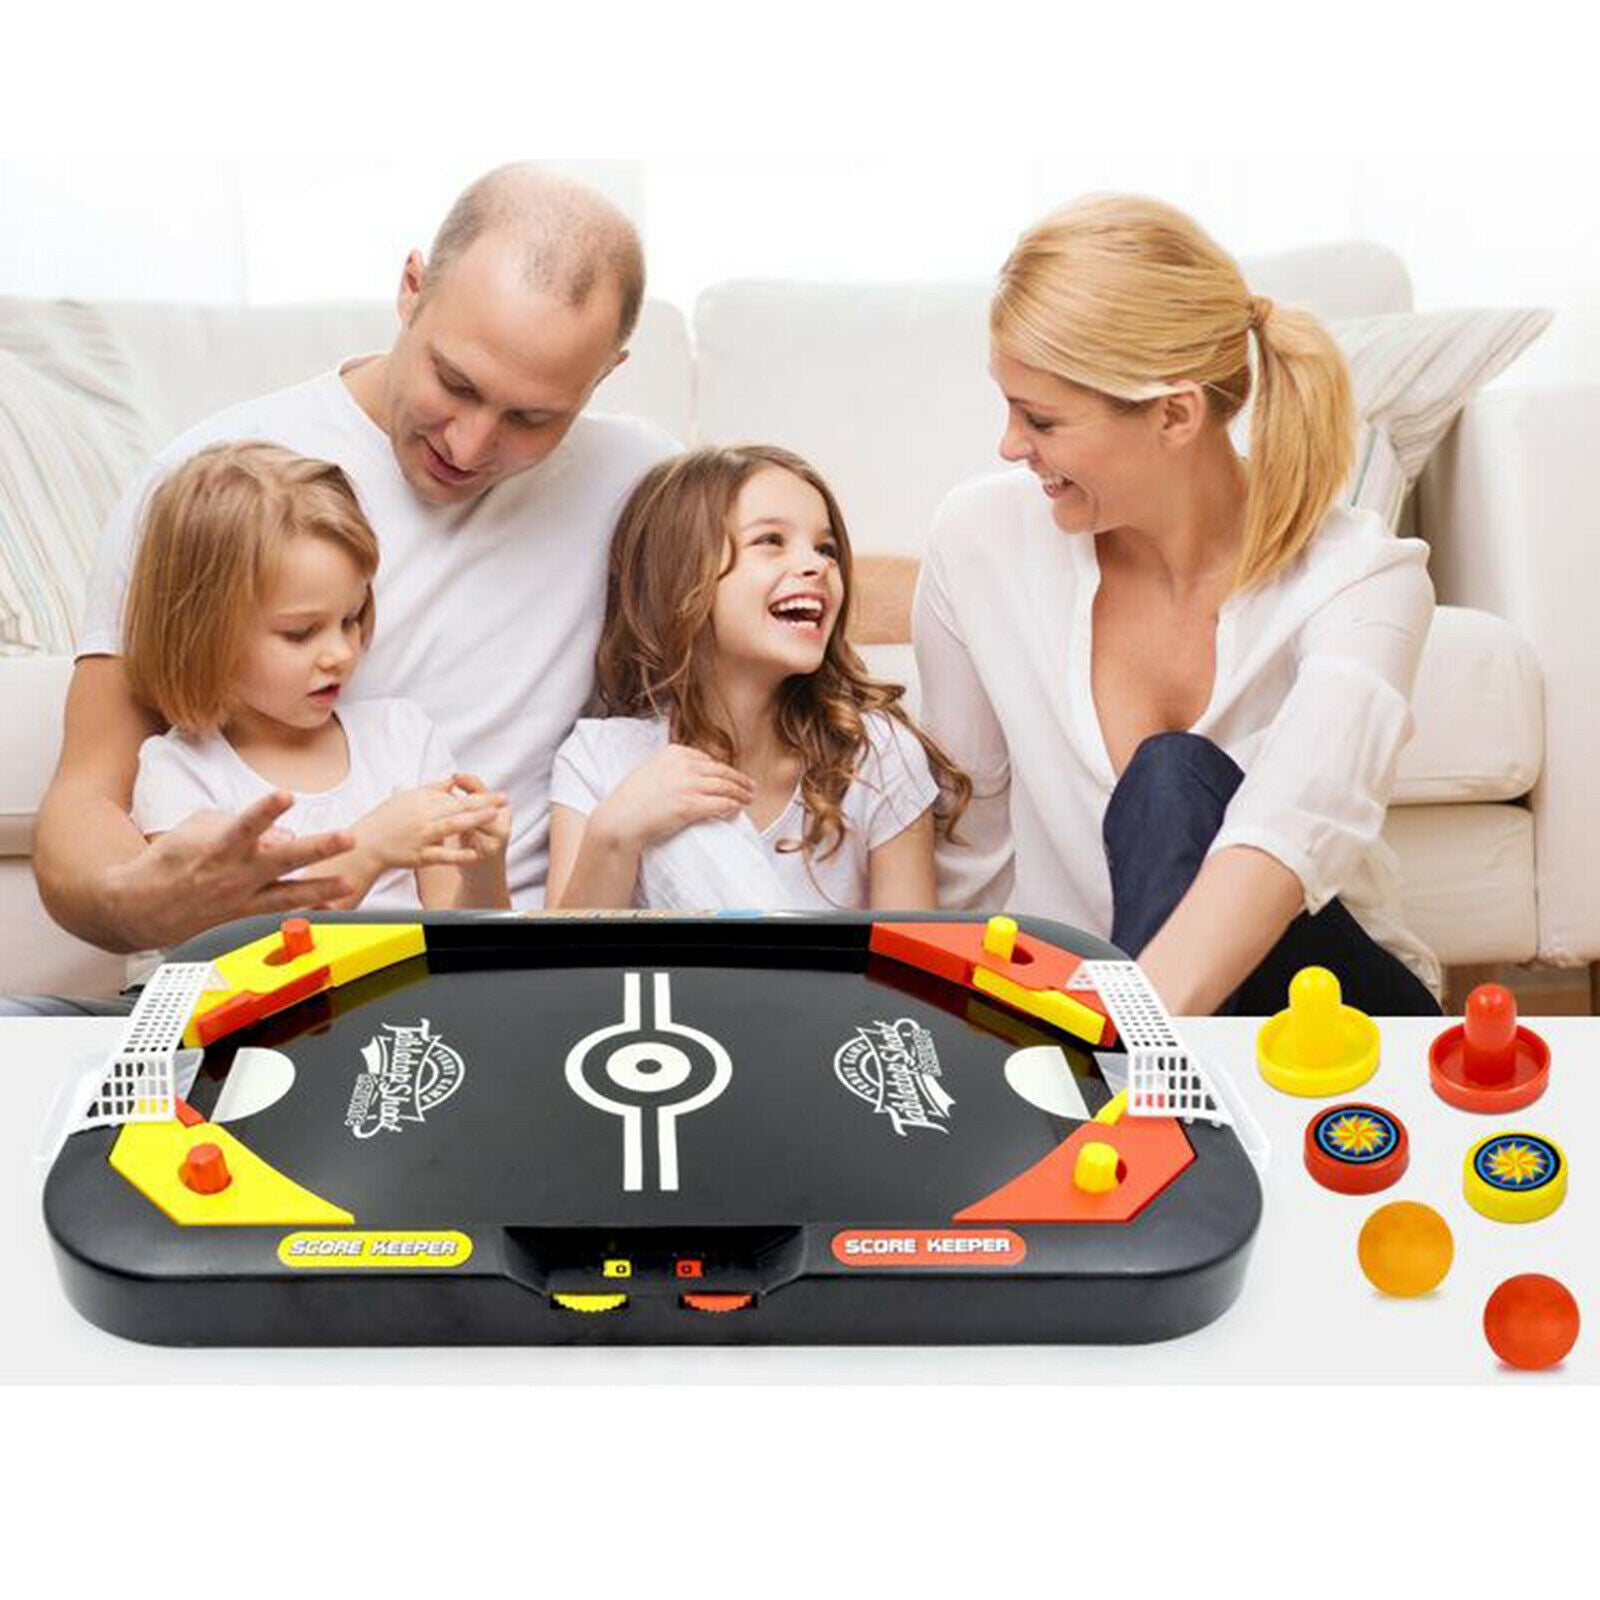 Plastic Desktop Air Hockey Table Game Portable Hockey Game for Kids and Adults